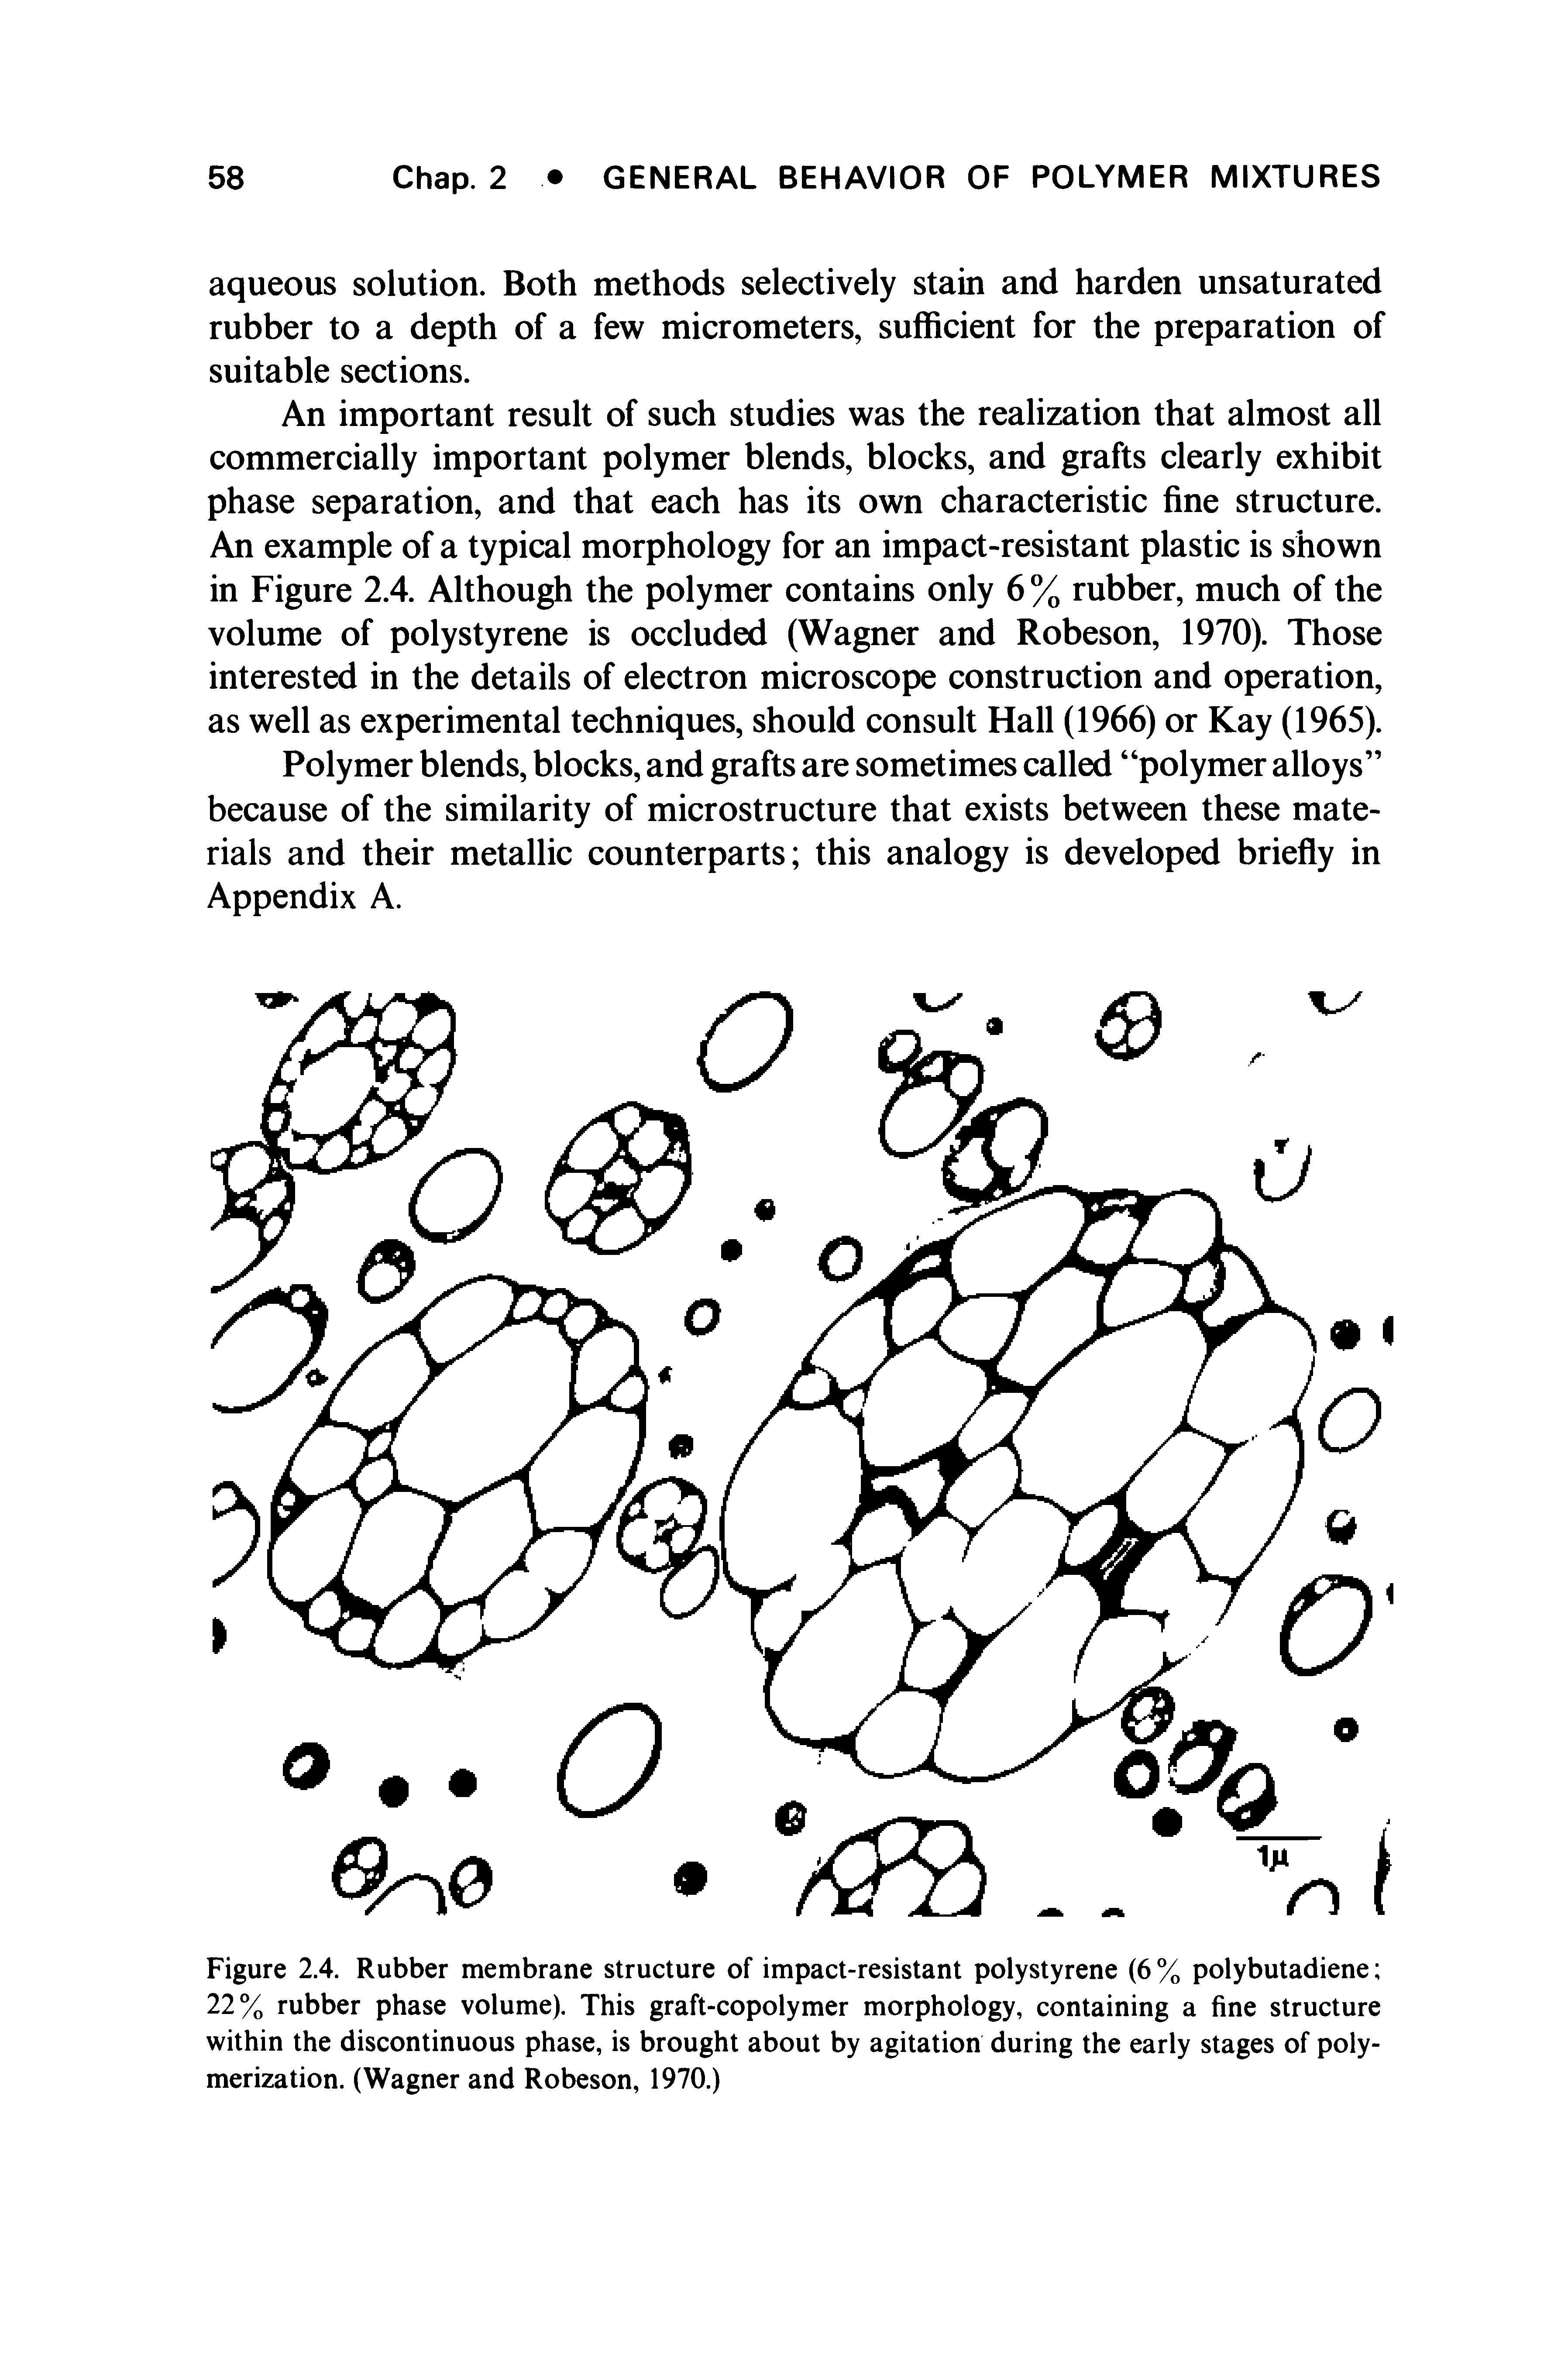 Figure 2.4. Rubber membrane structure of impact-resistant polystyrene (6% polybutadiene 22% rubber phase volume). This graft-copolymer morphology, containing a fine structure within the discontinuous phase, is brought about by agitation during the early stages of polymerization. (Wagner and Robeson, 1970.)...